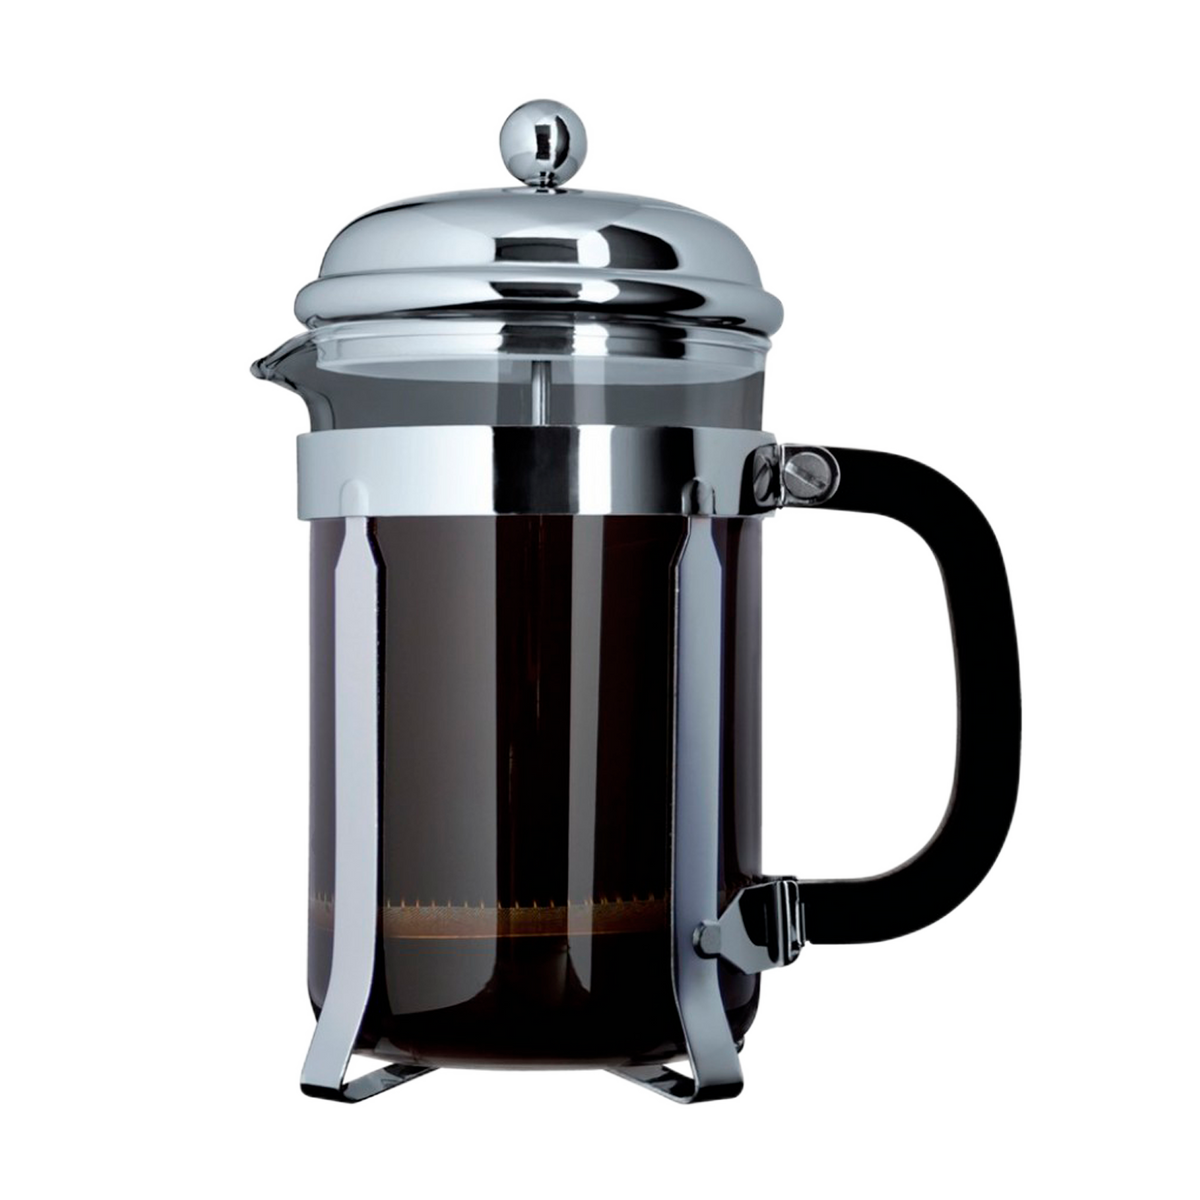 Café Olé Classic Coffee Maker (Cafetiere) with FREE Coffee